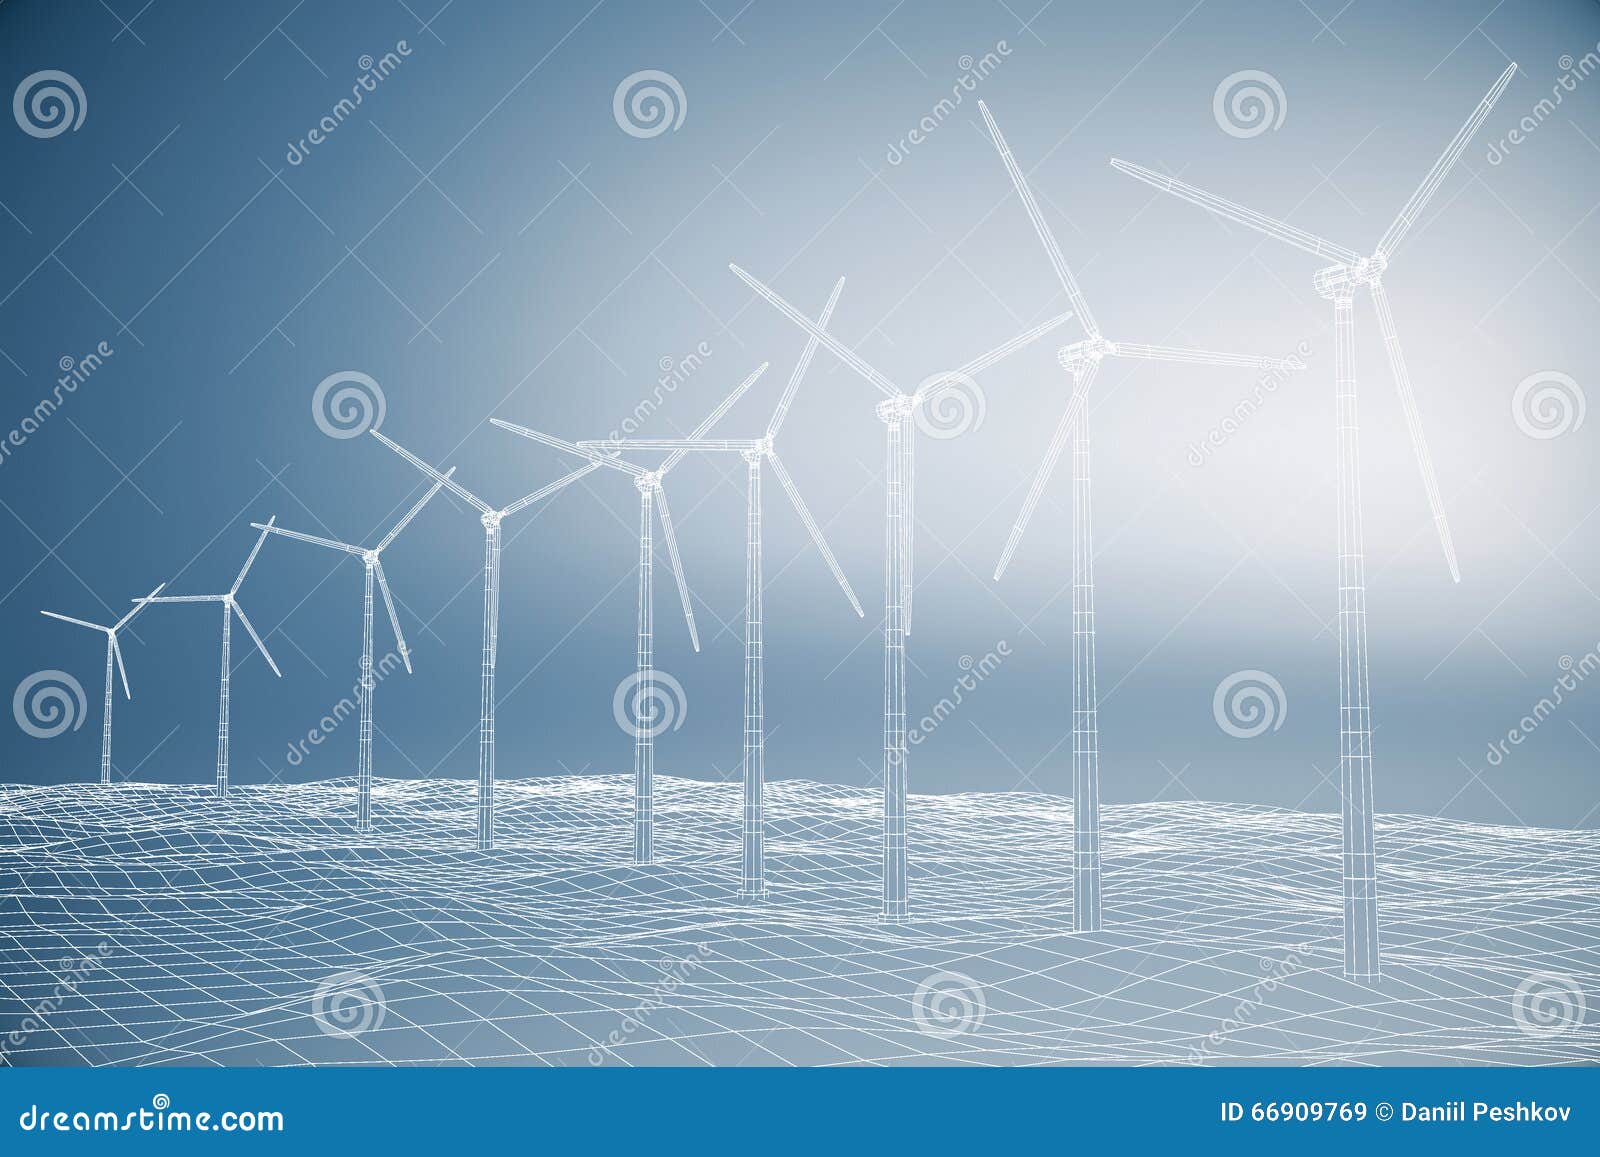 blueprint of a windmills on a blue background